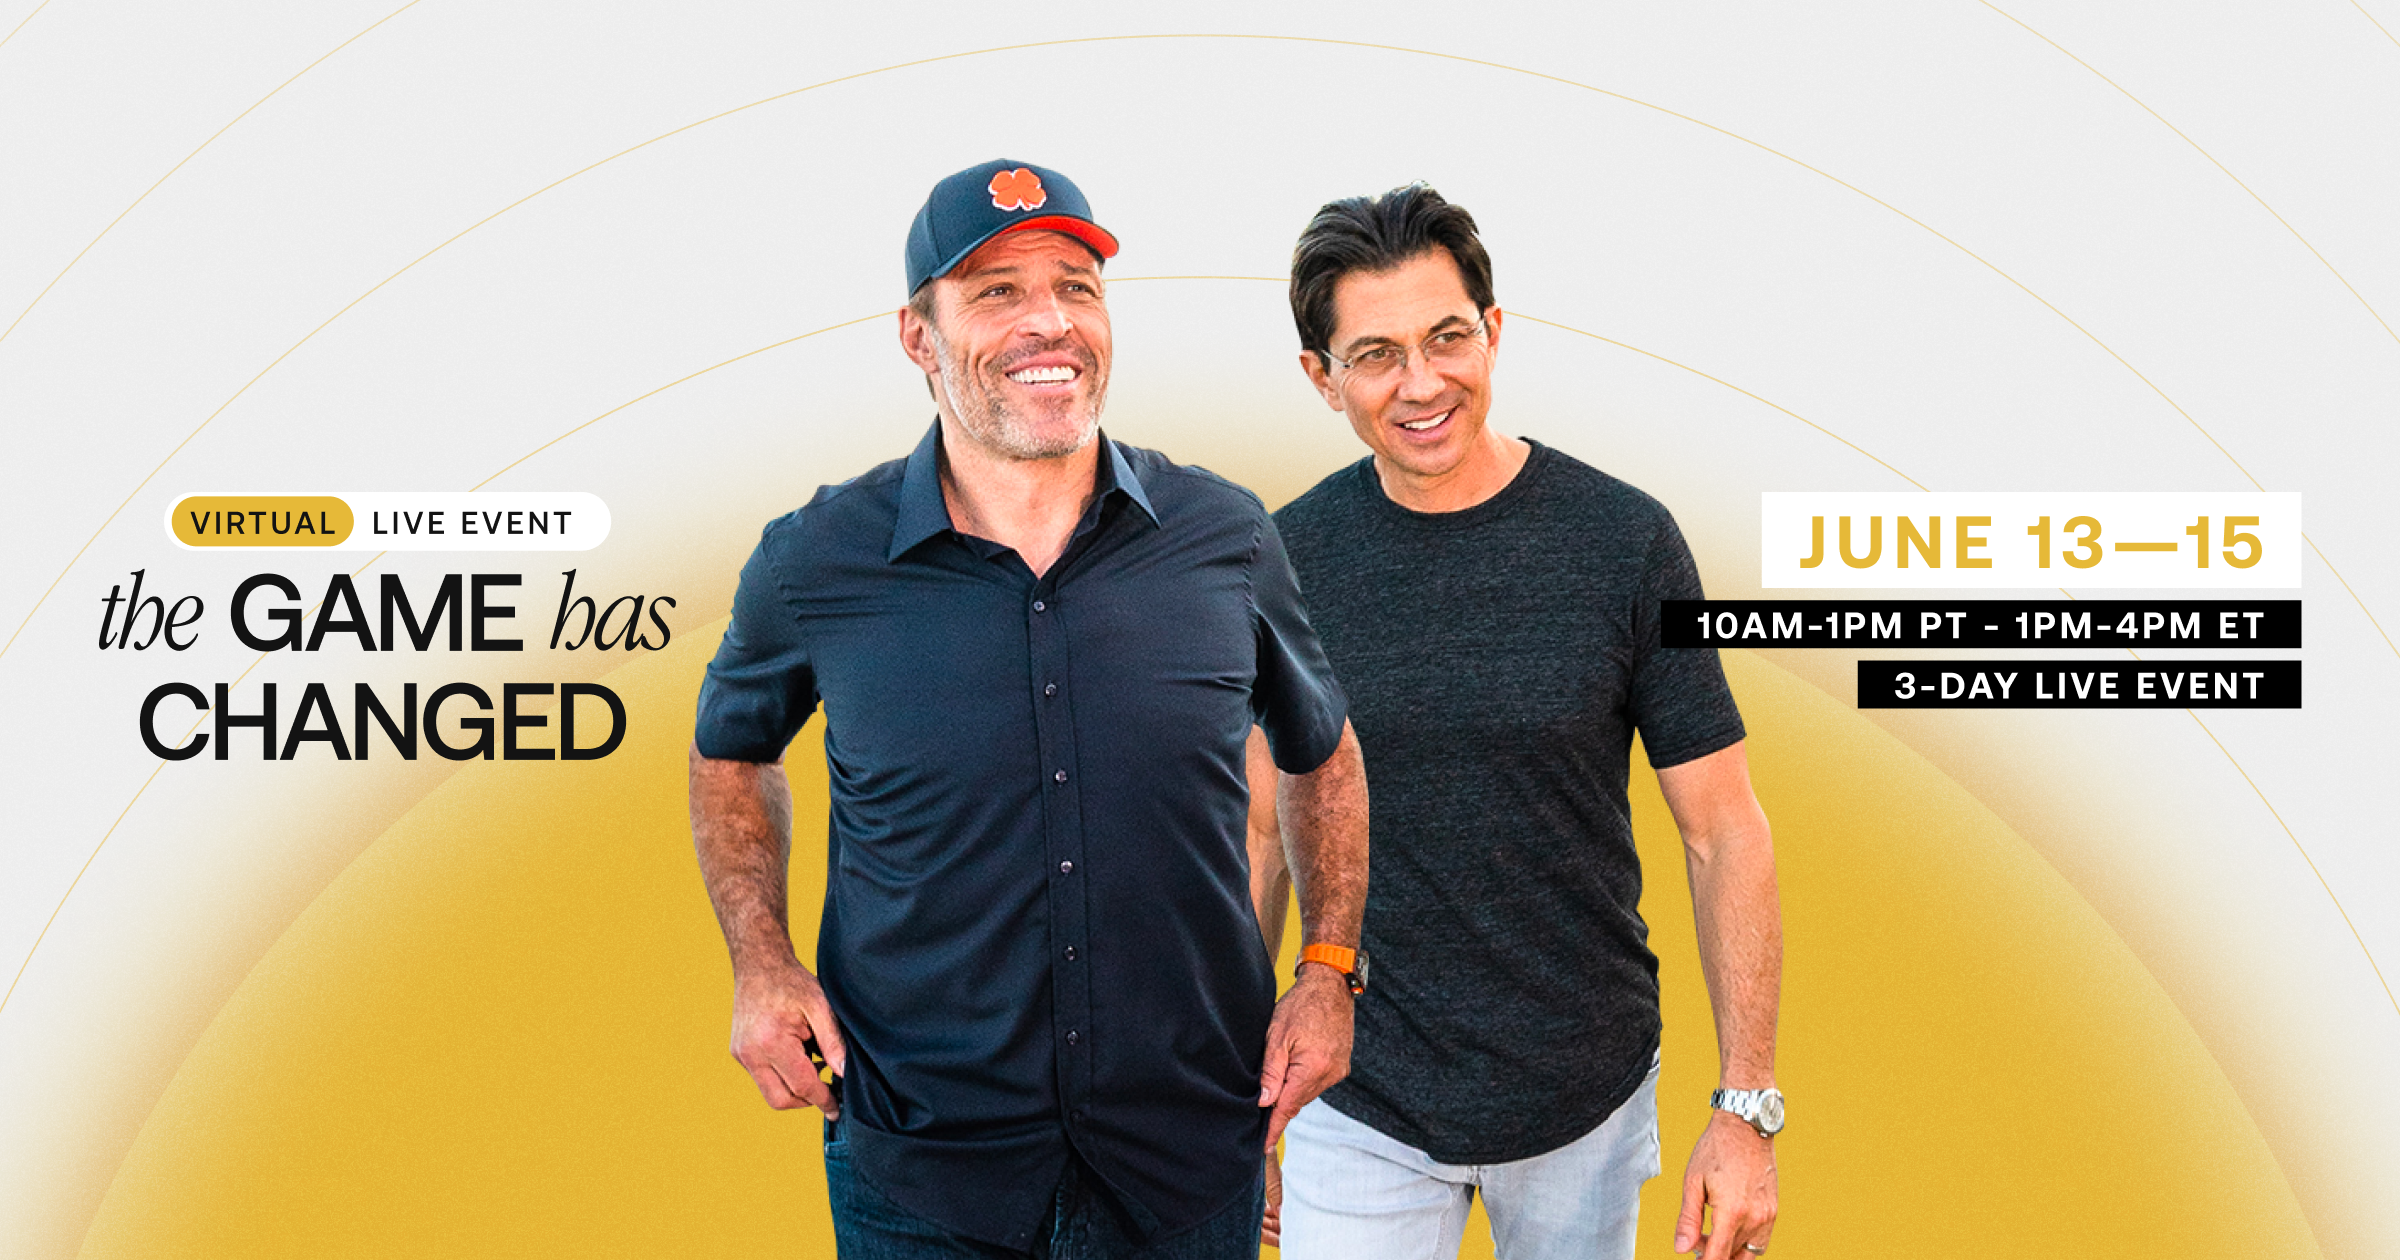 Get Your Free Ticket to the 3-Day "The Game Has Changed Event" with Tony Robbins, Dean Graziosi and Special Surprise Guests